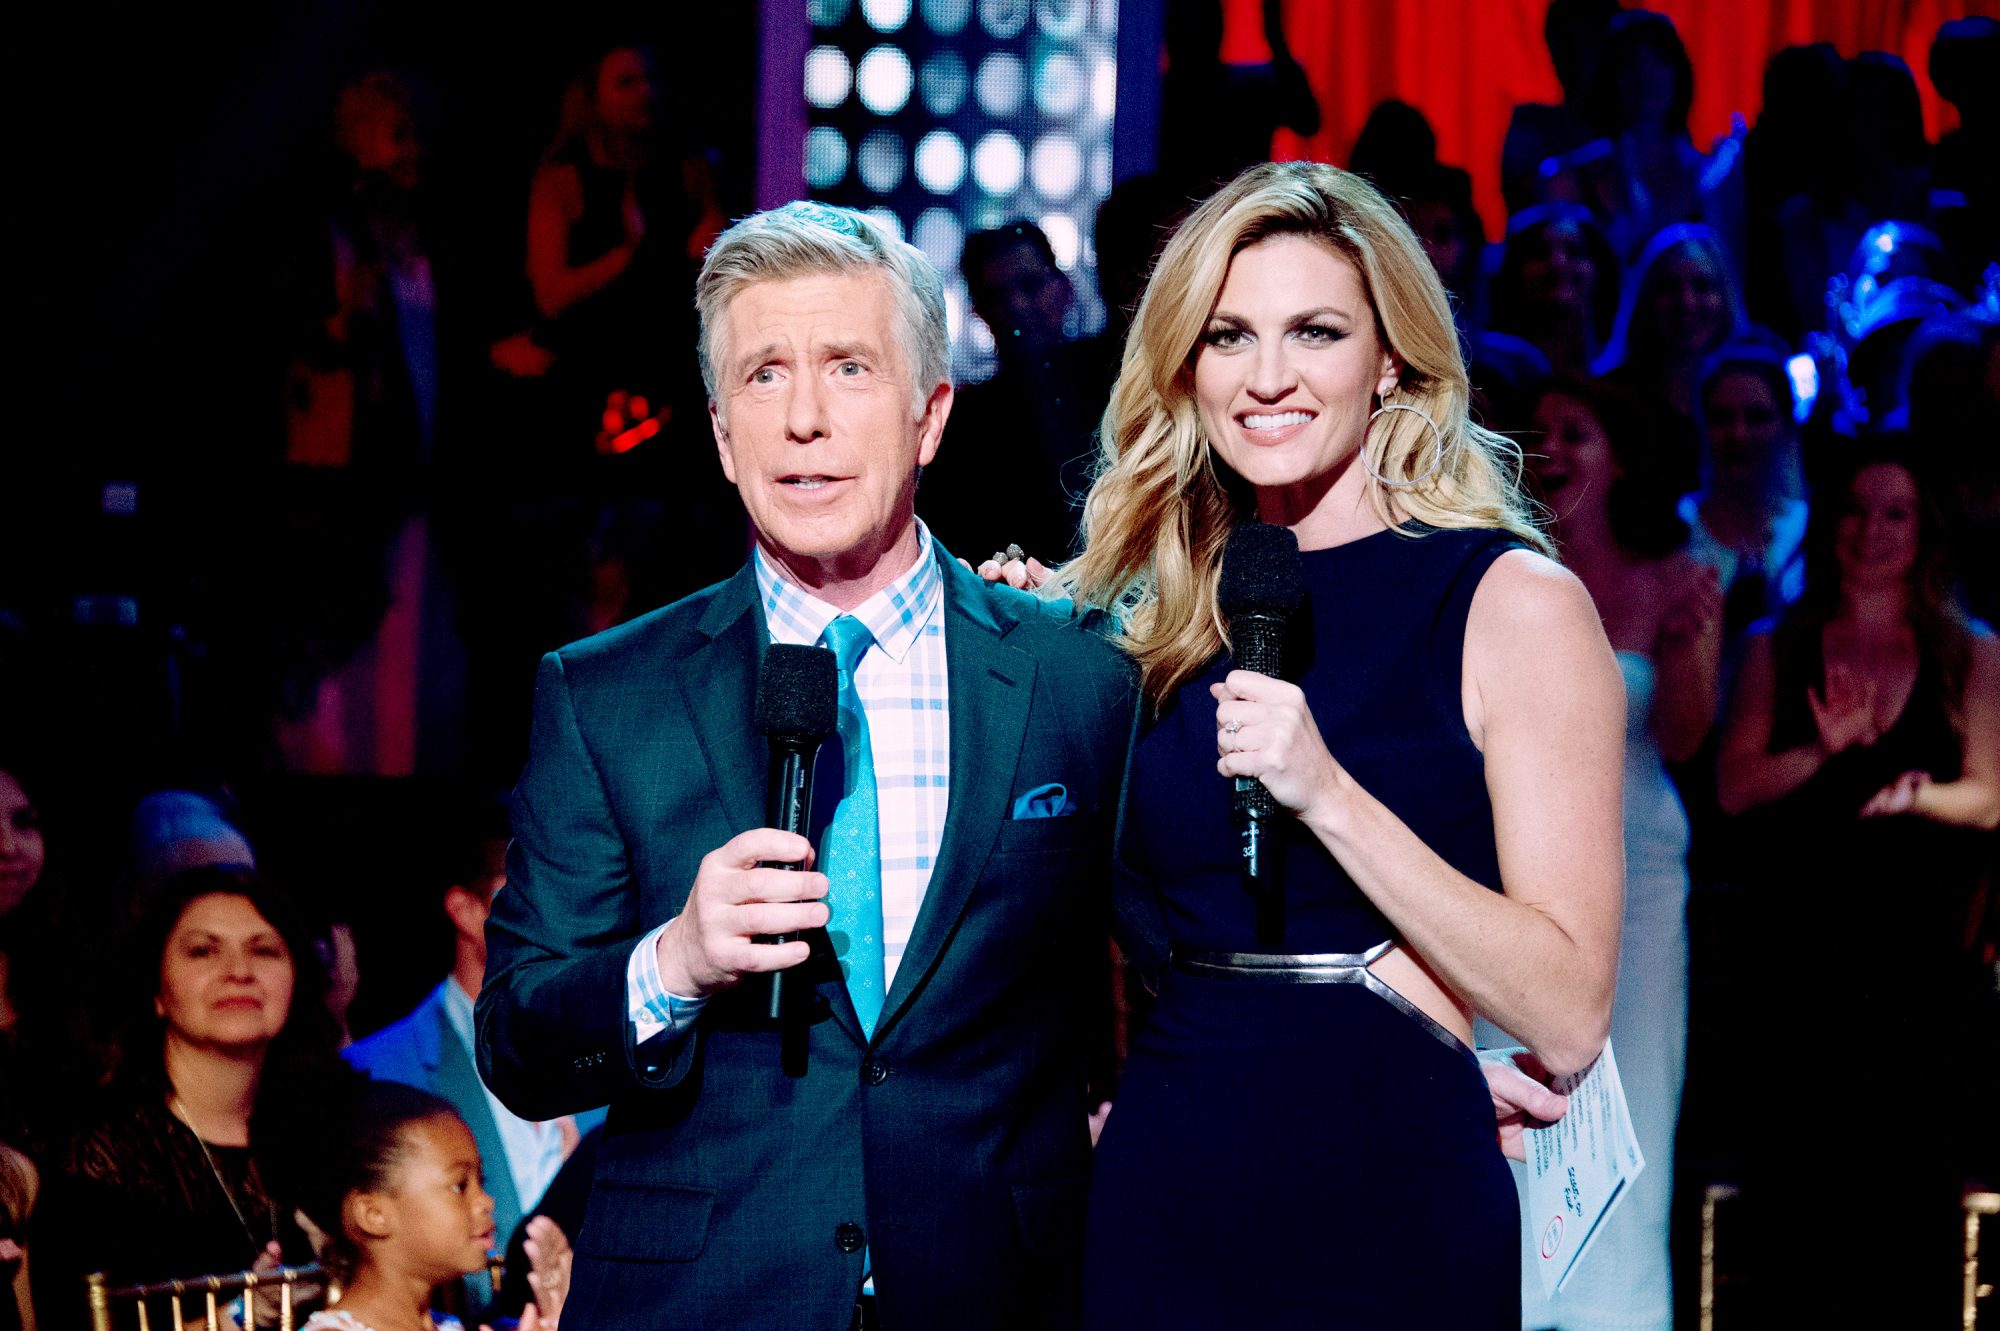 Tom Bergeron on Why He Was 'Fired' From ABC Series Dancing With The Stars